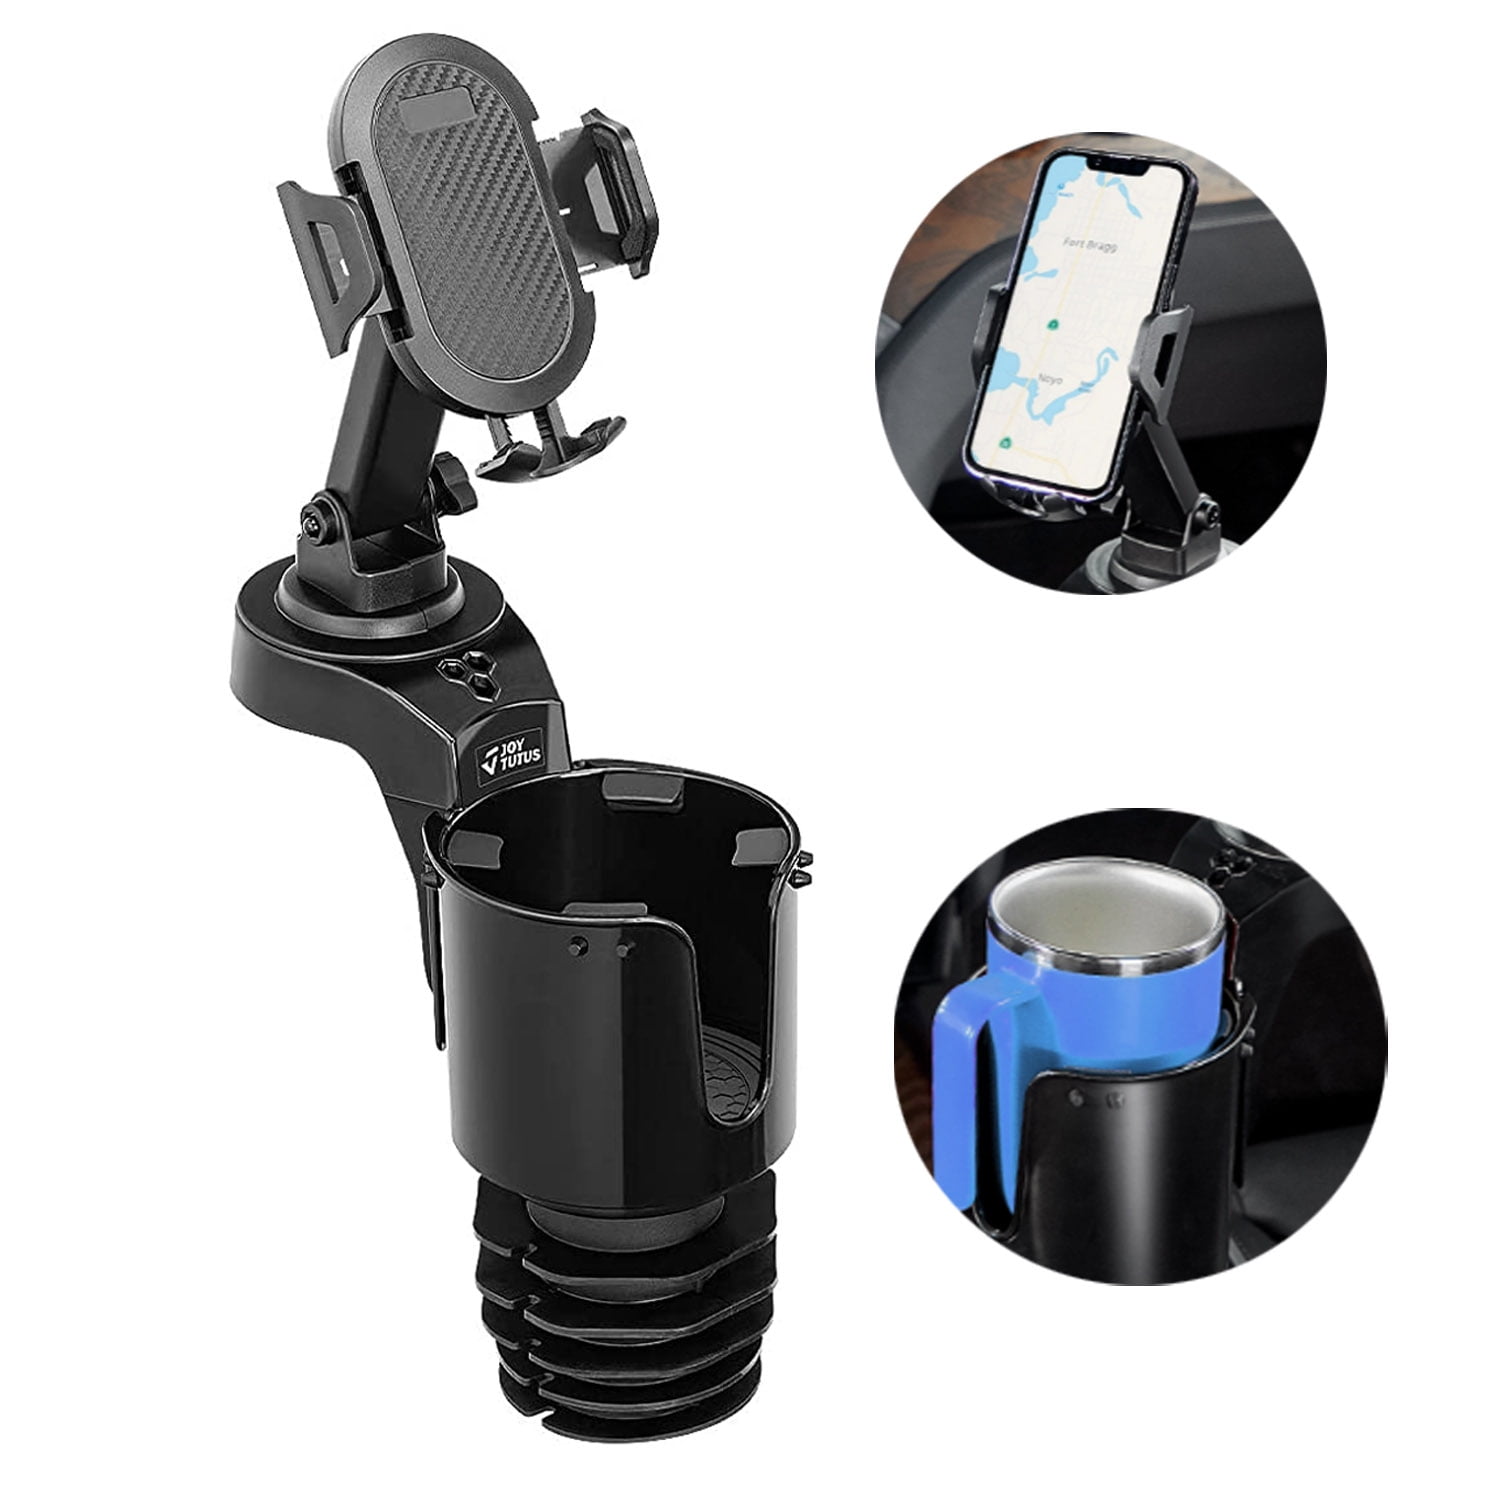 Car Cup Holder Expander Adjustable Base with Phone Mount THIS HILL